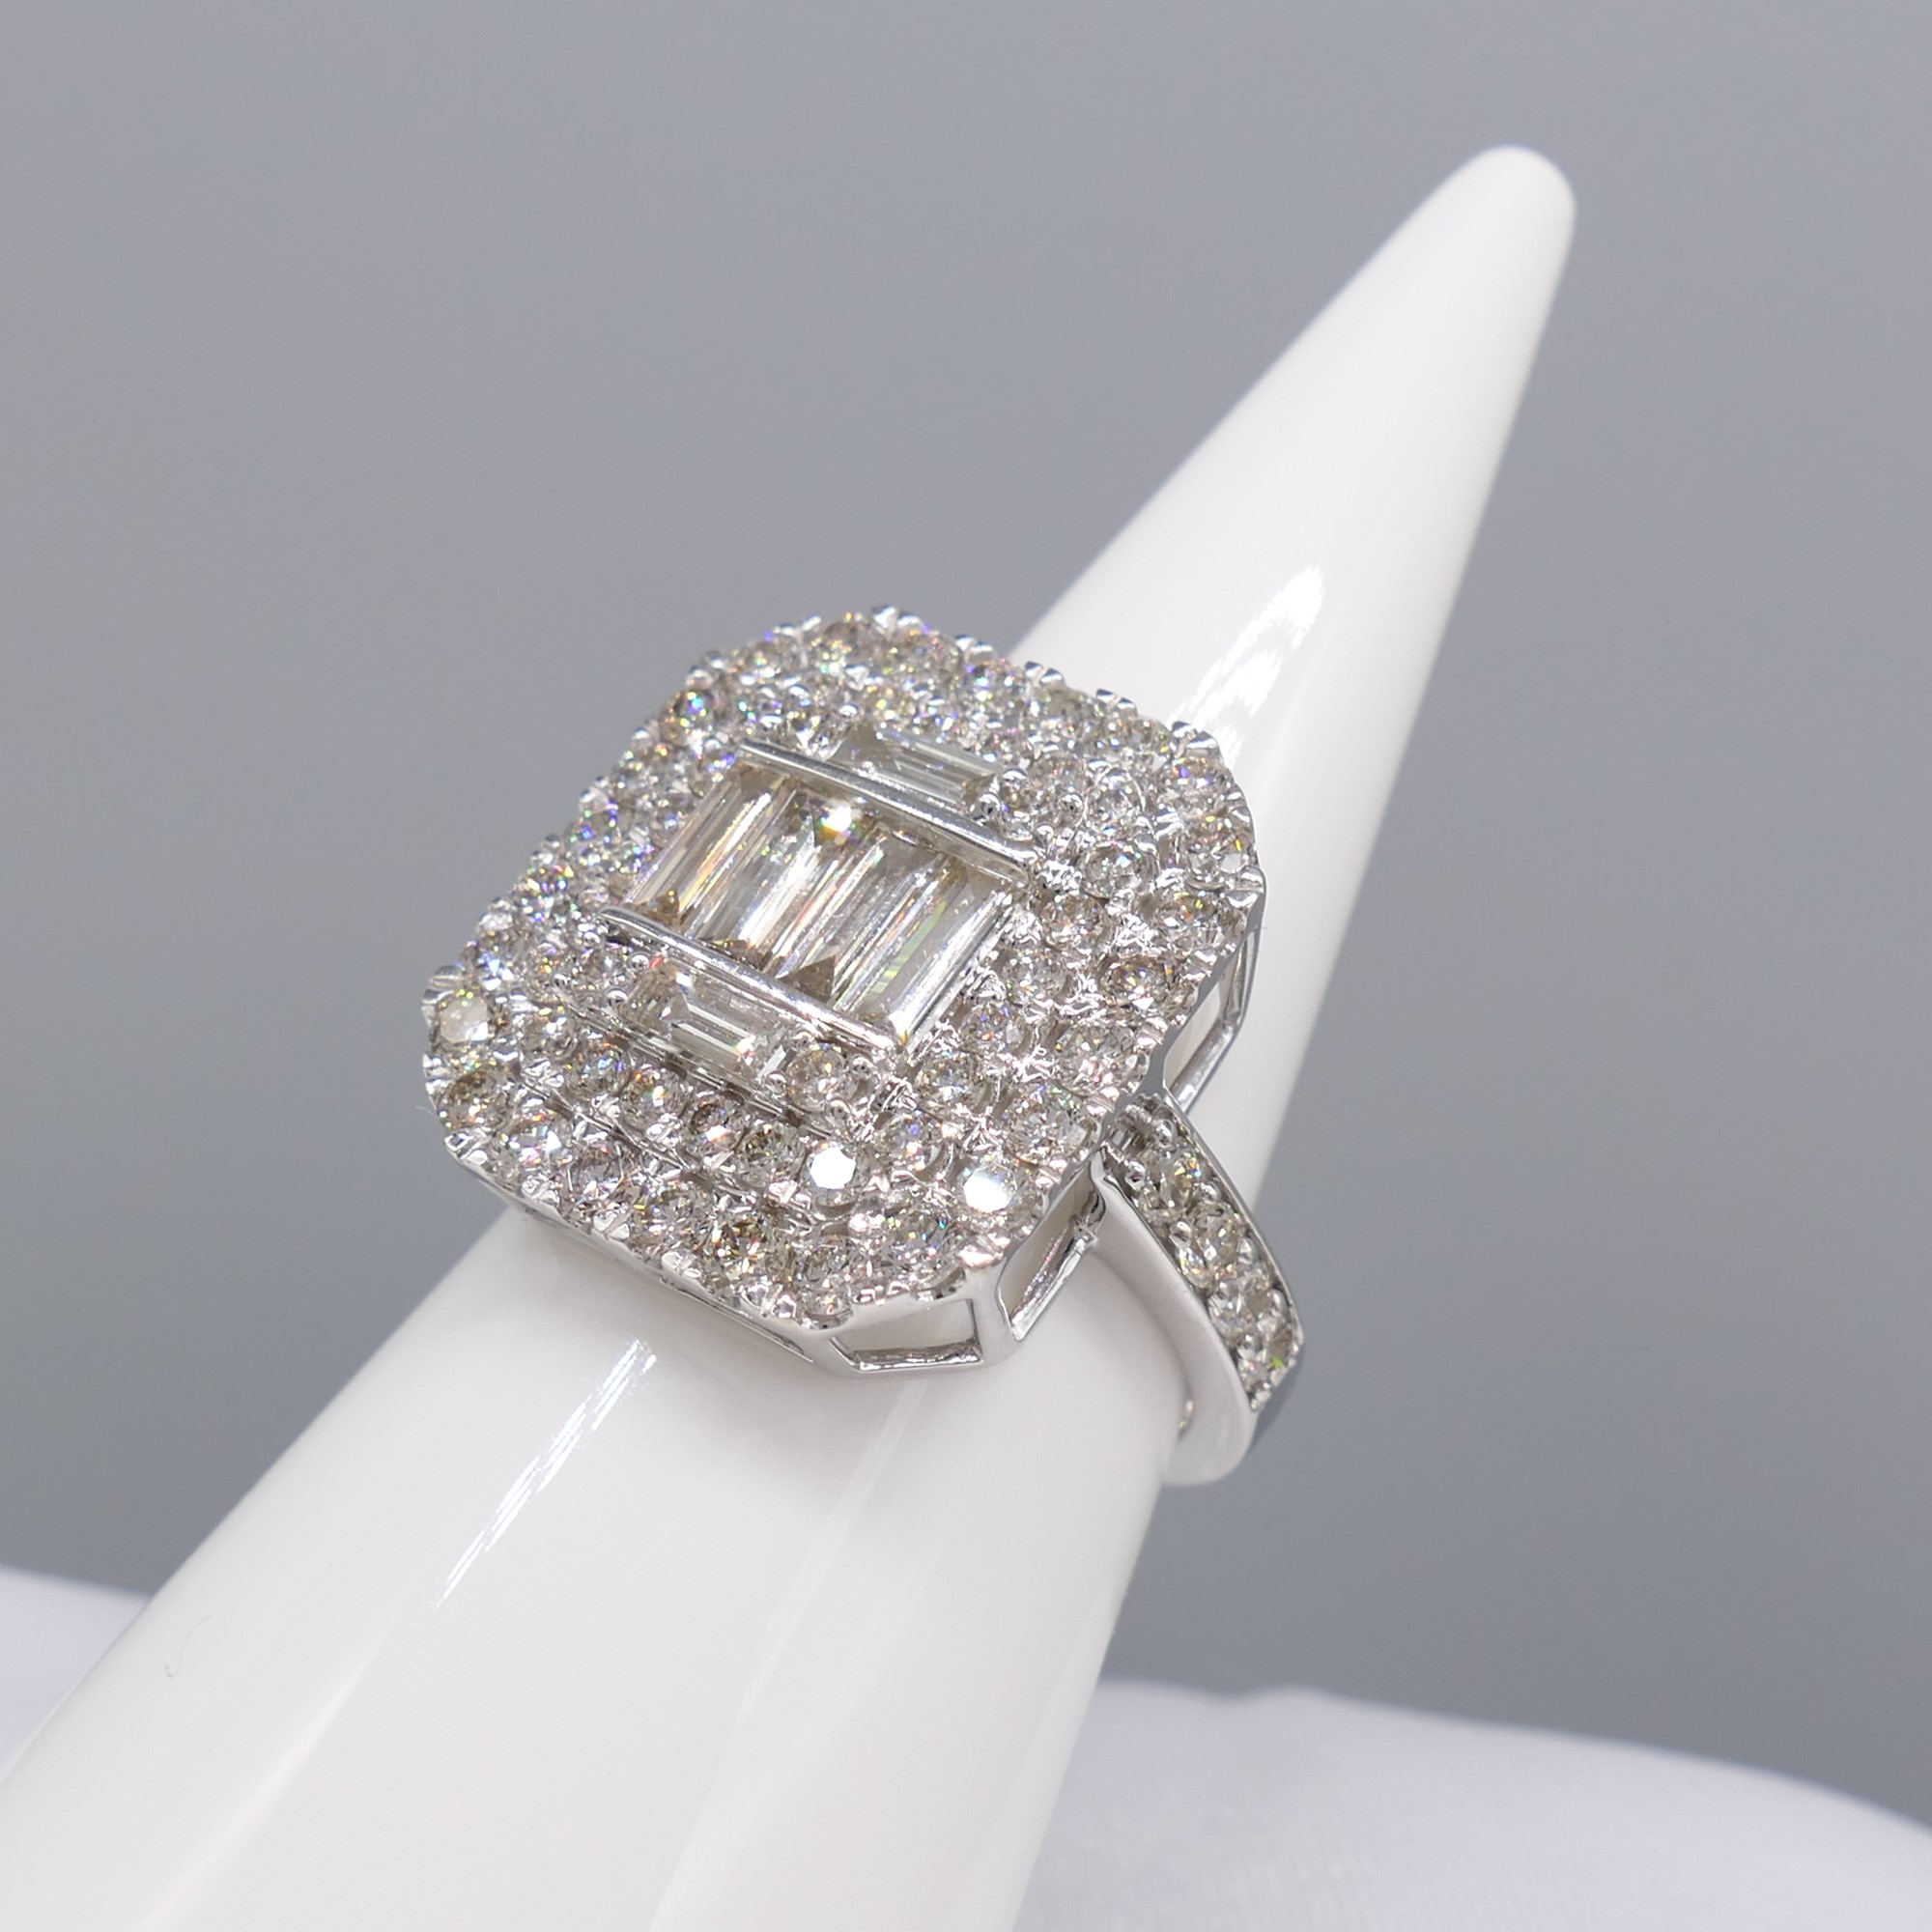 Large and Impressive White Gold 2.75 Carat Diamond Cocktail Ring - Image 4 of 8